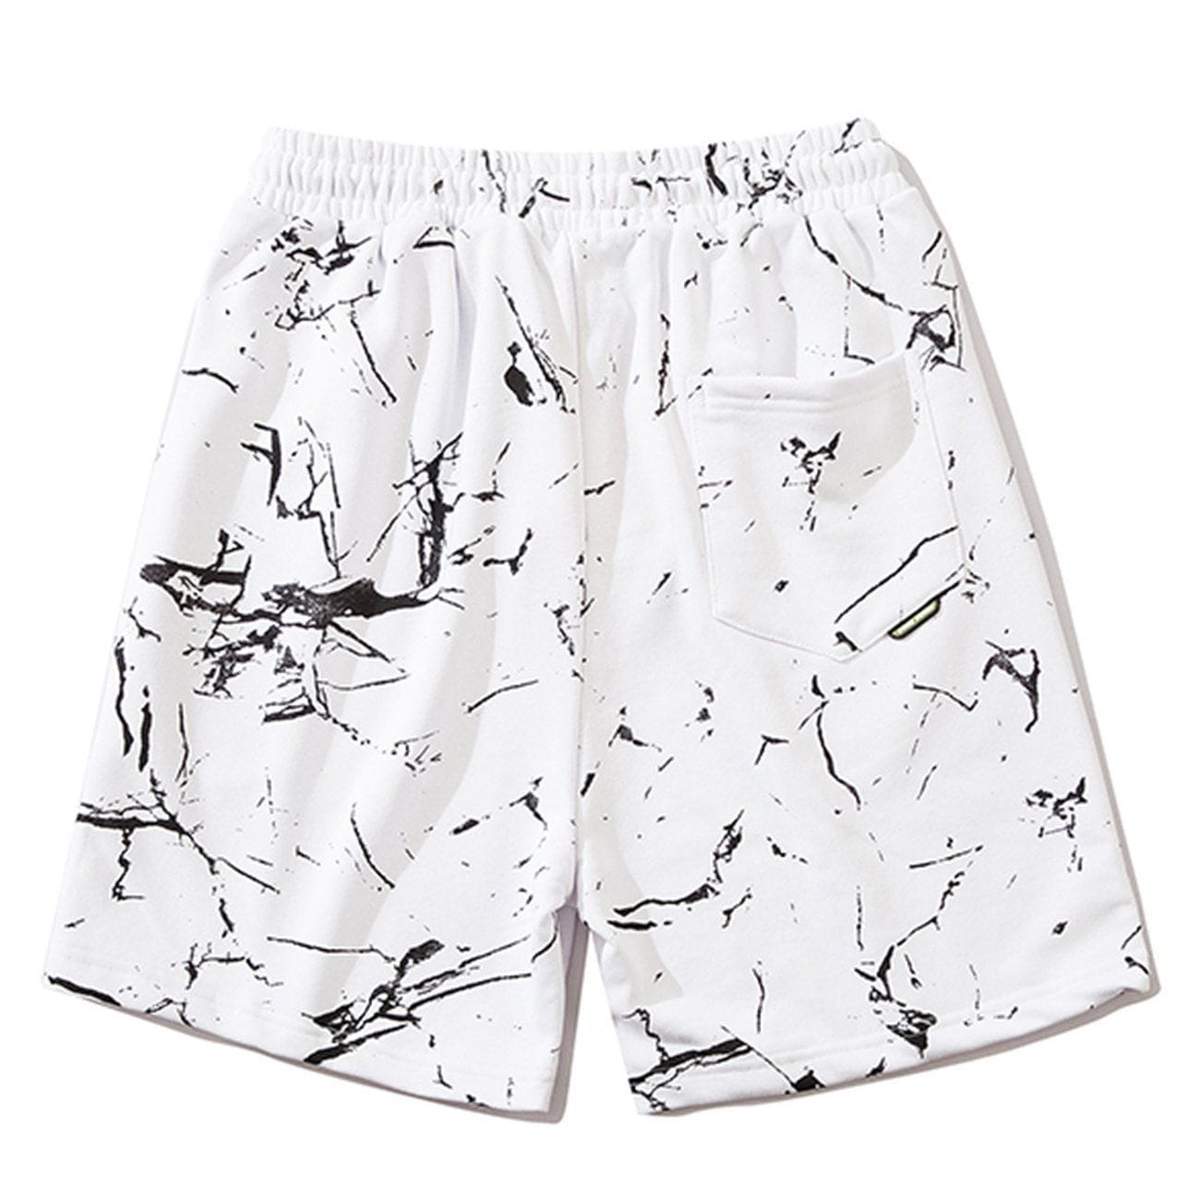 WLS Ink Letter Printed Saturn Sports Soft Cotton Shorts